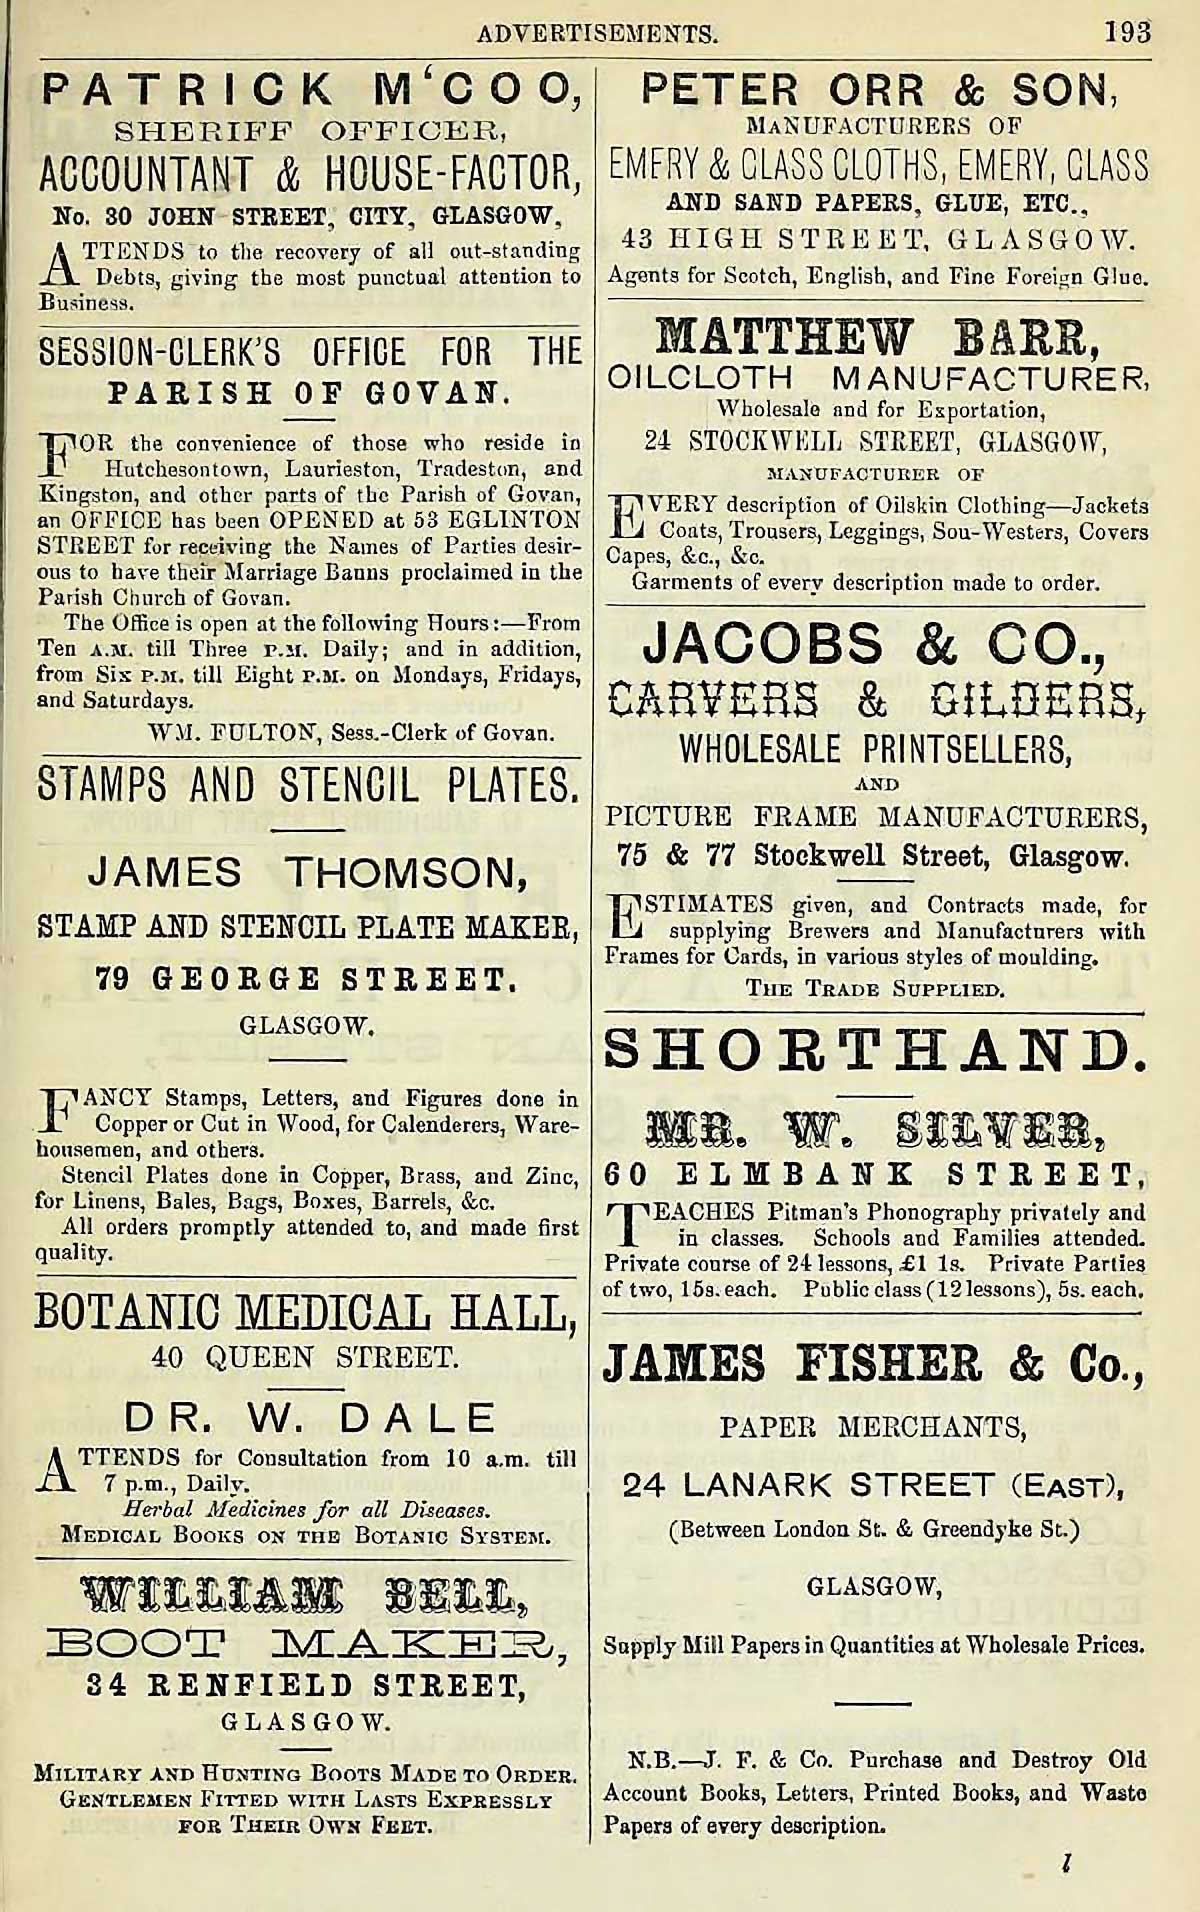 1868 Glasgow Post Office Directory